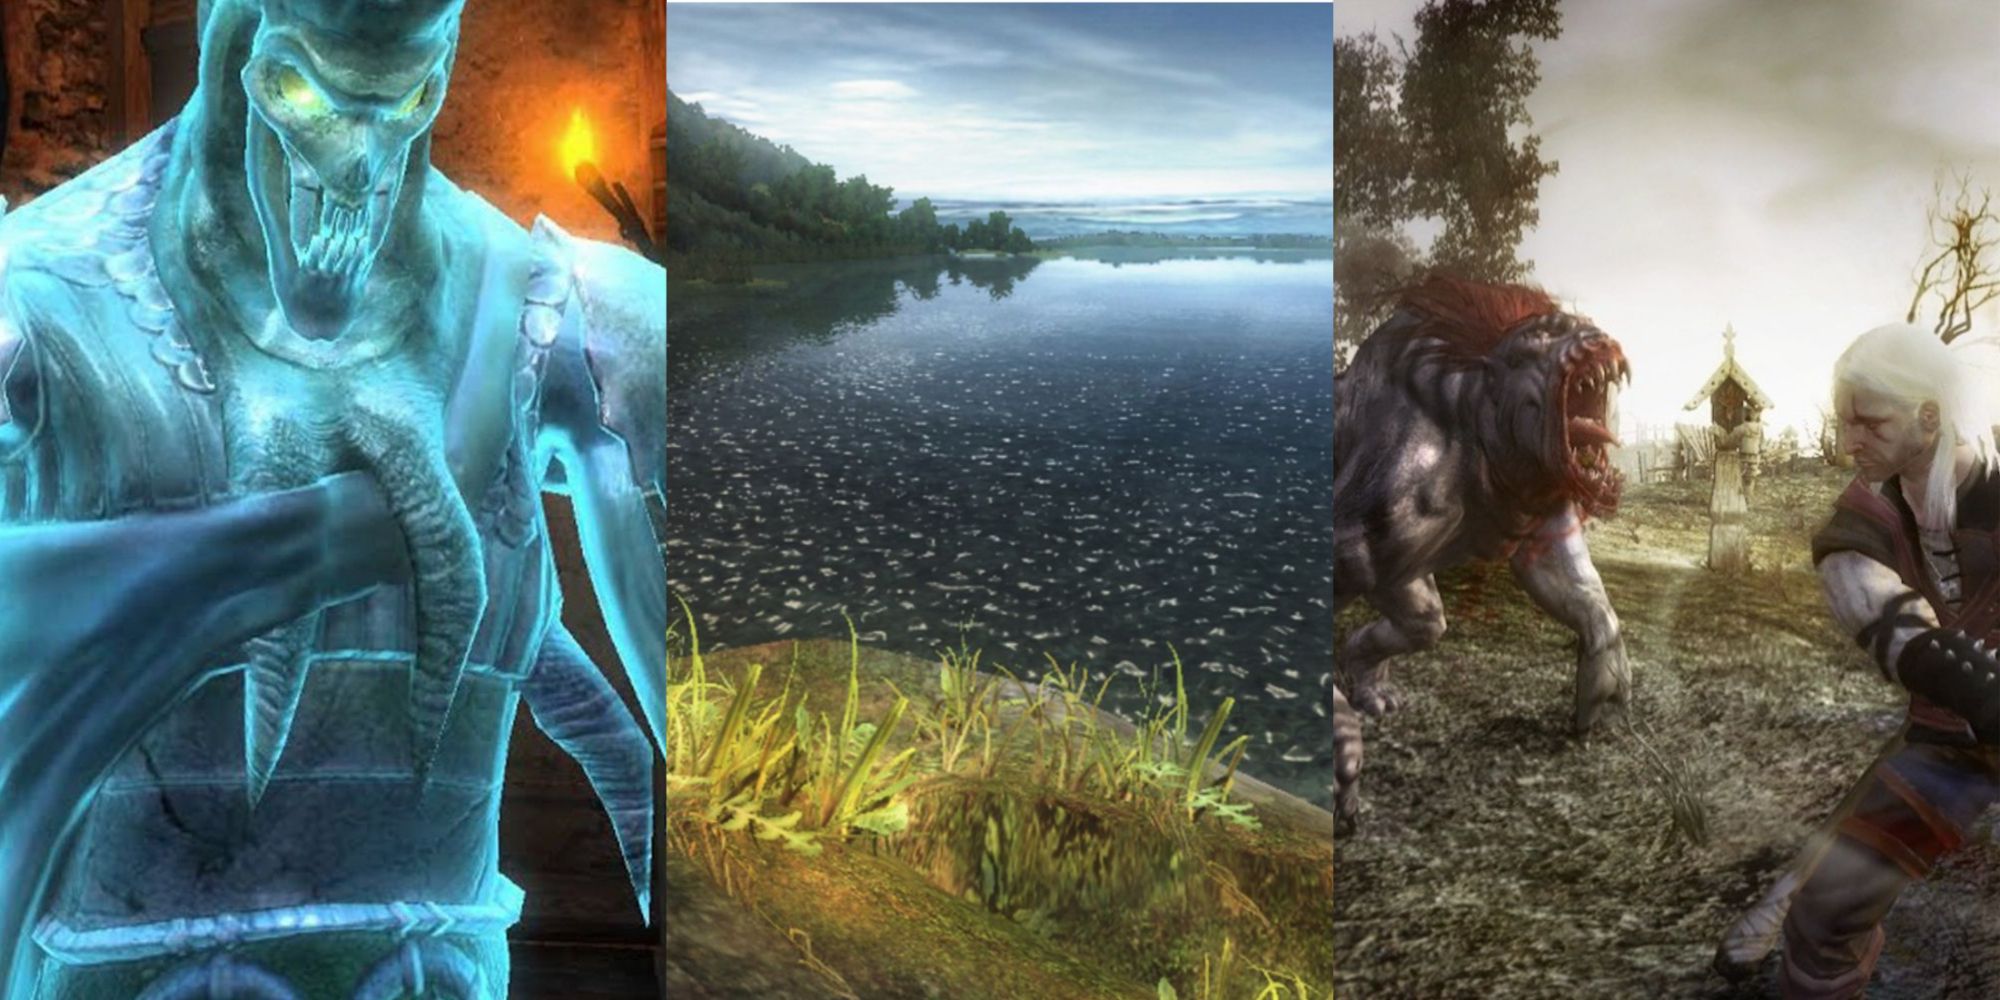 The Faery's Gifts • CD Projekt Announce Witcher 1 Remake, Internet